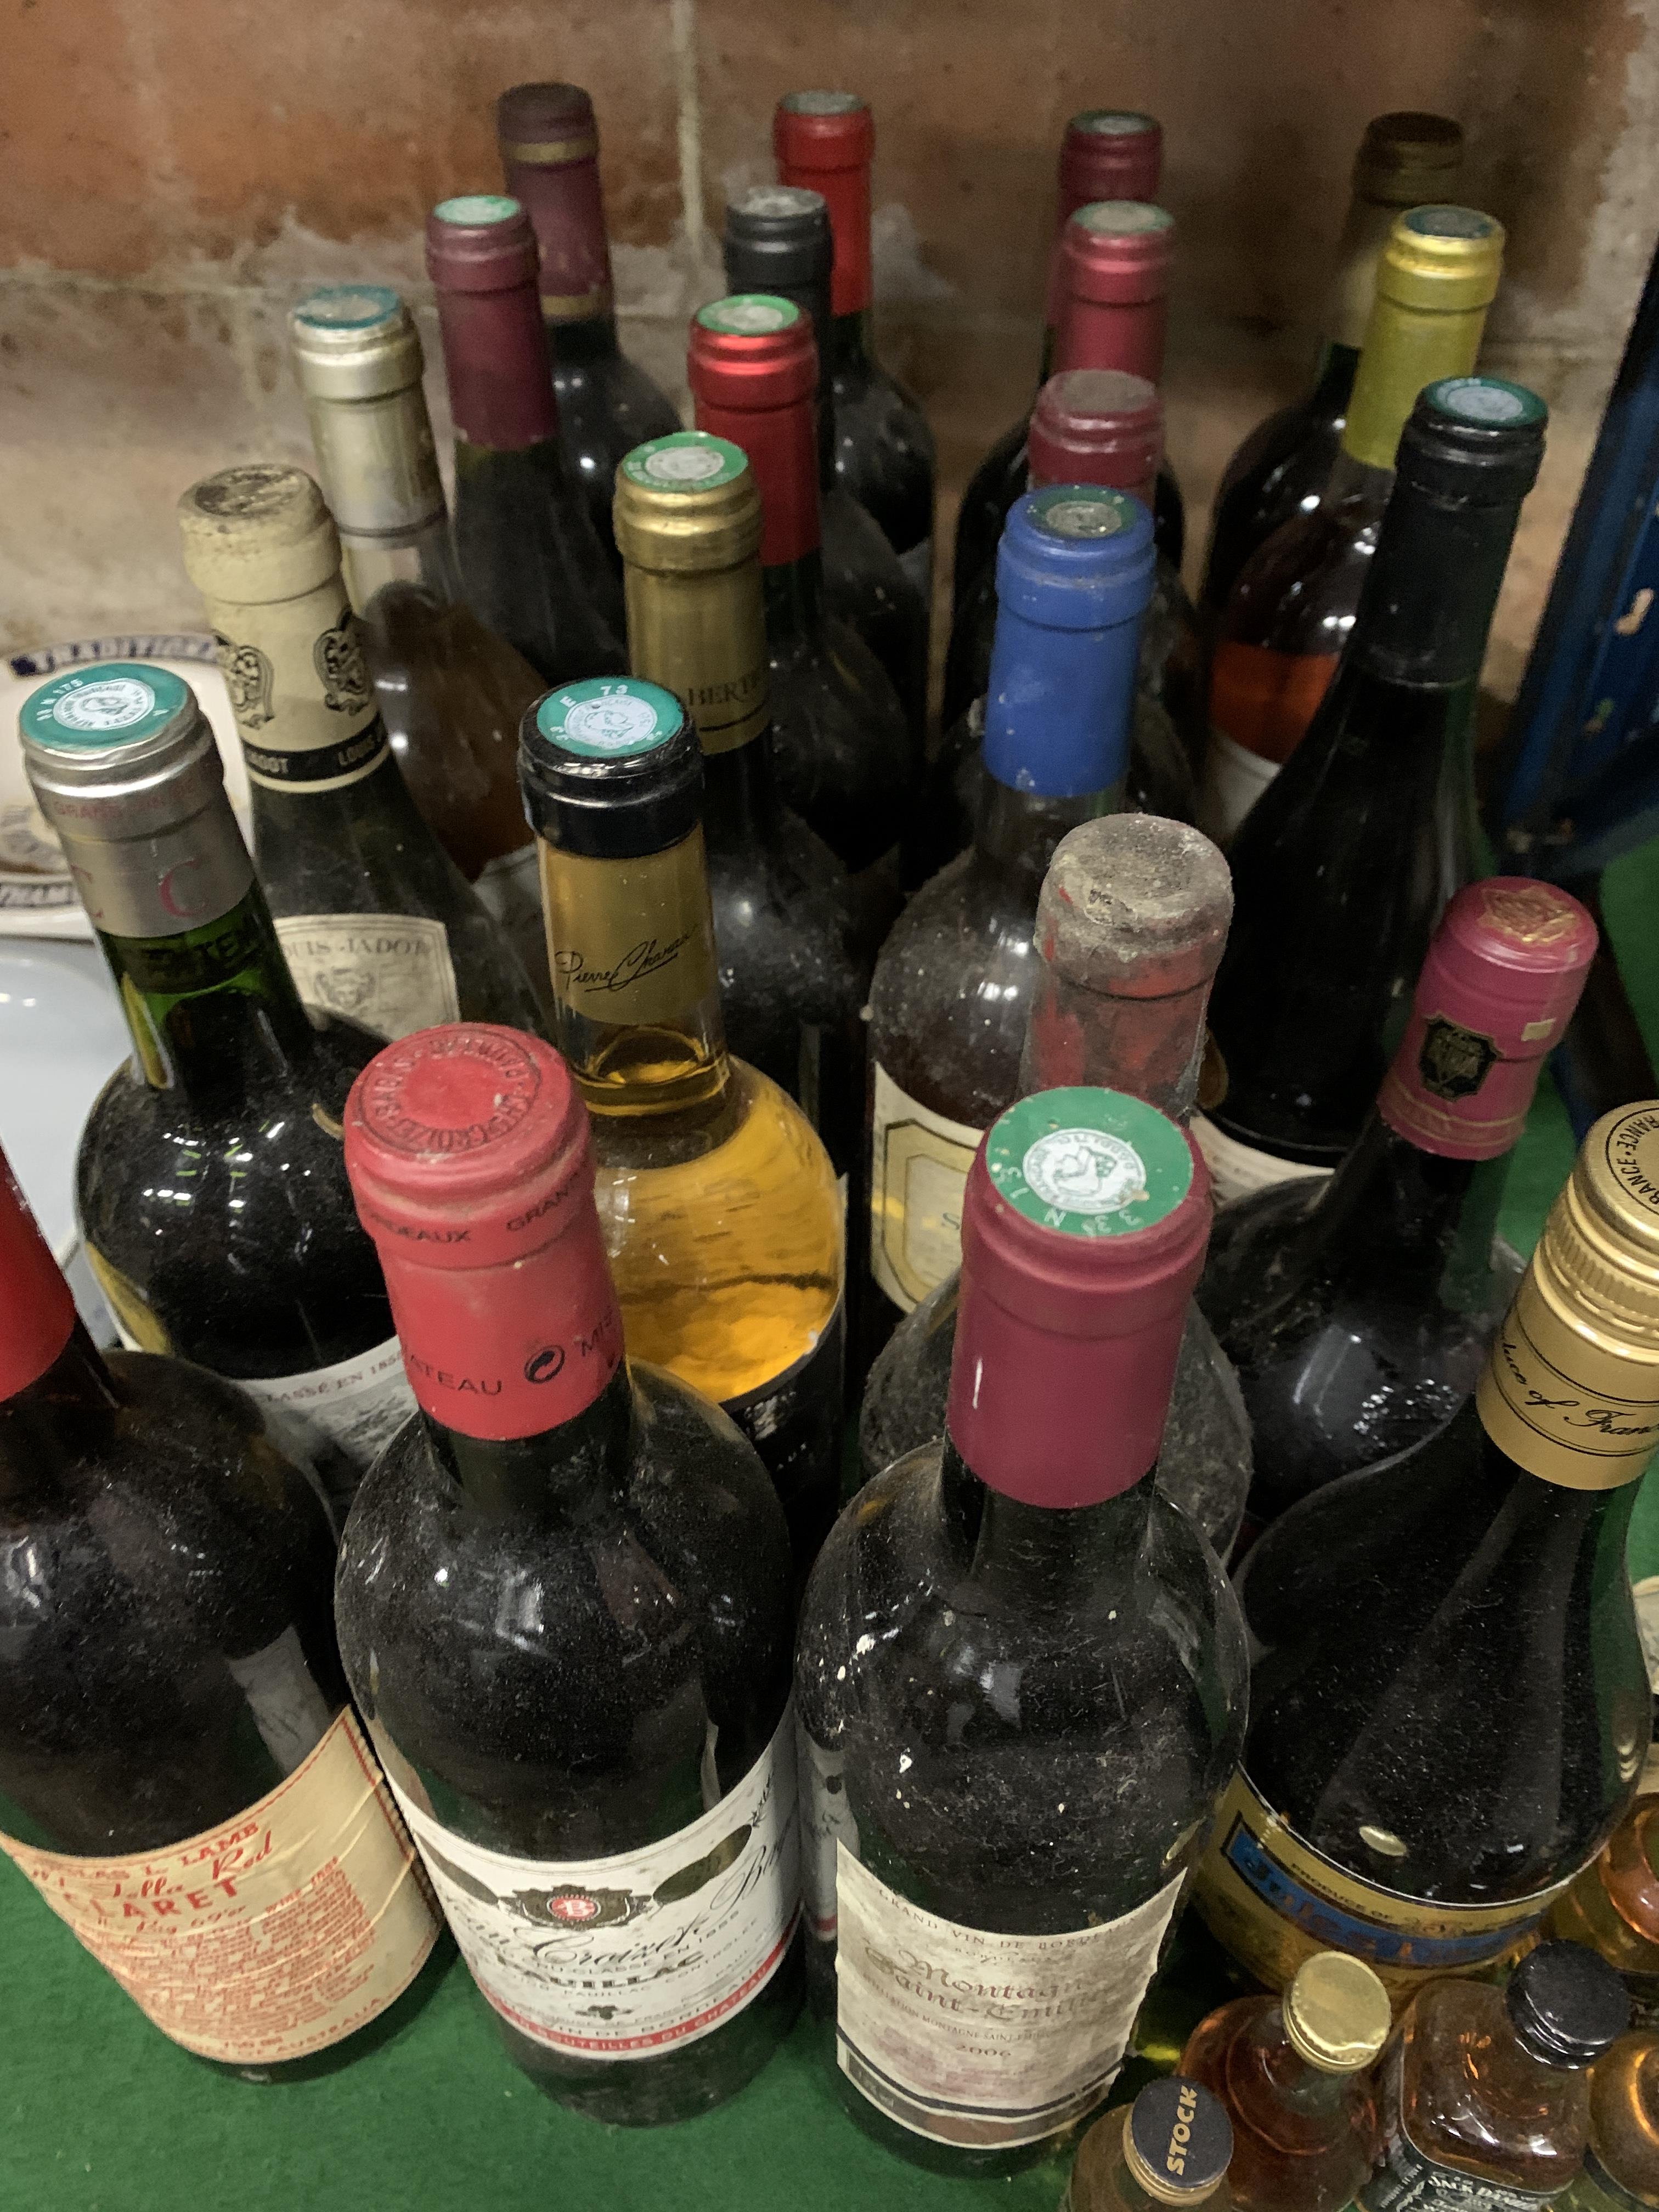 23 bottles of assorted French wines including Bordeaux.